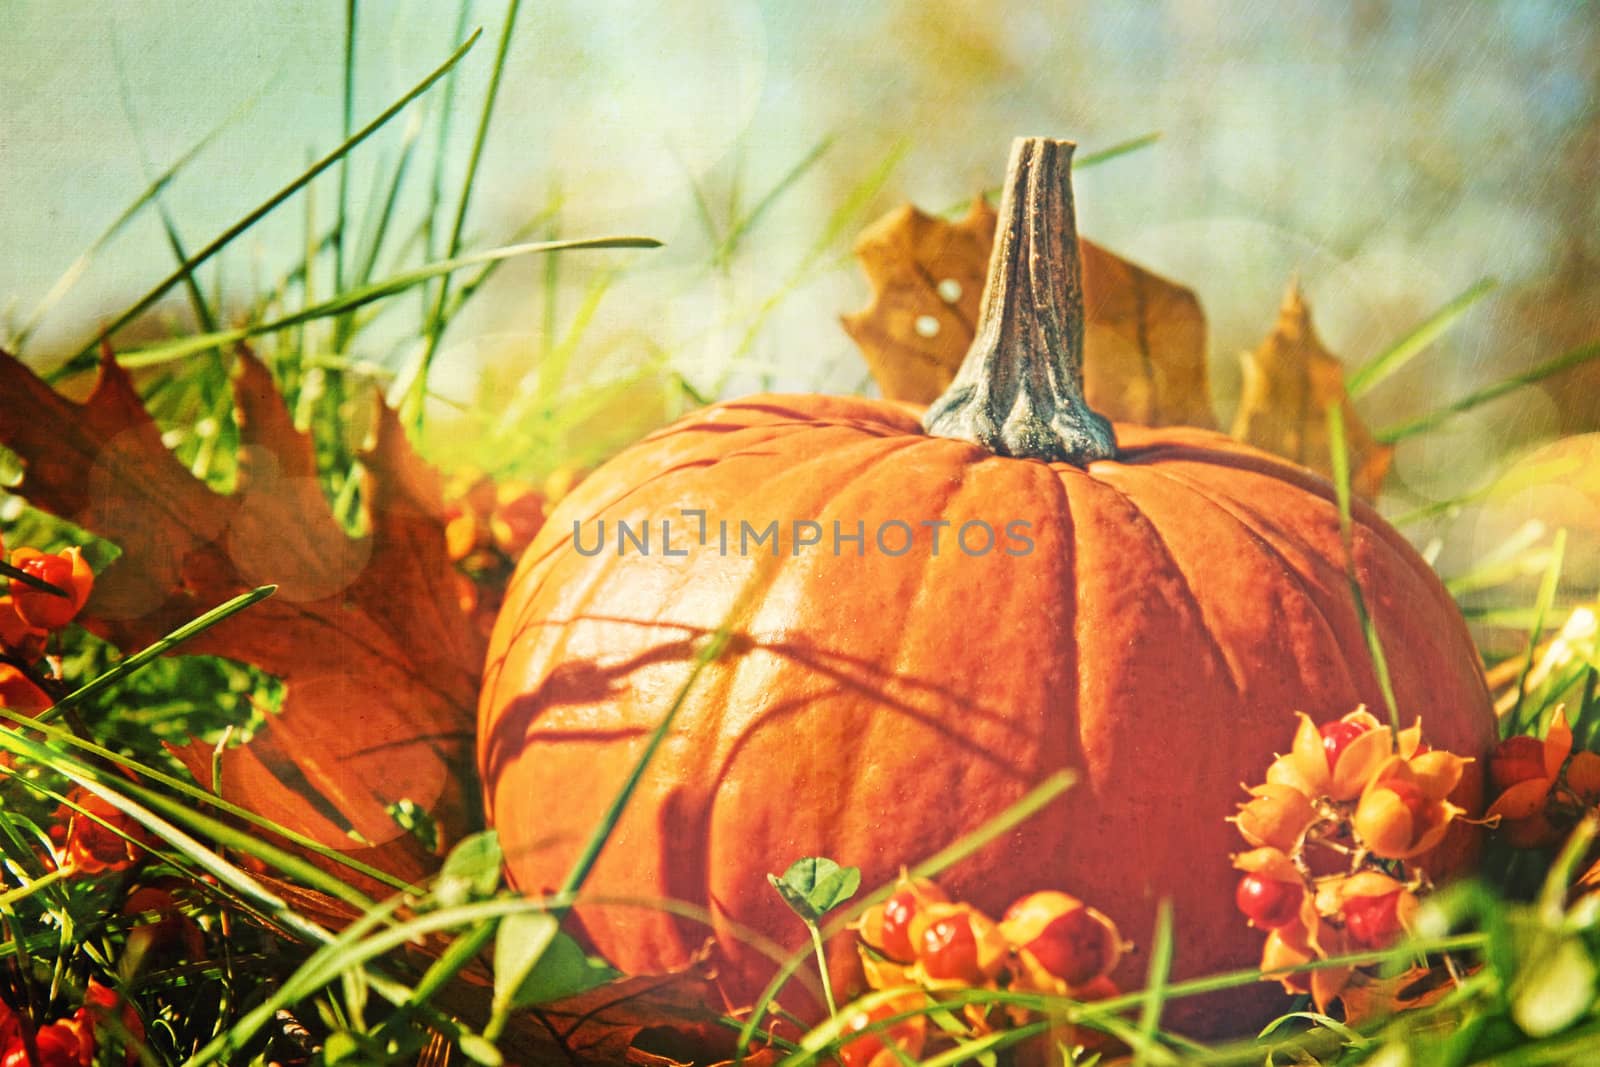 Pumpkin in the grass with vintage color feeling by Sandralise